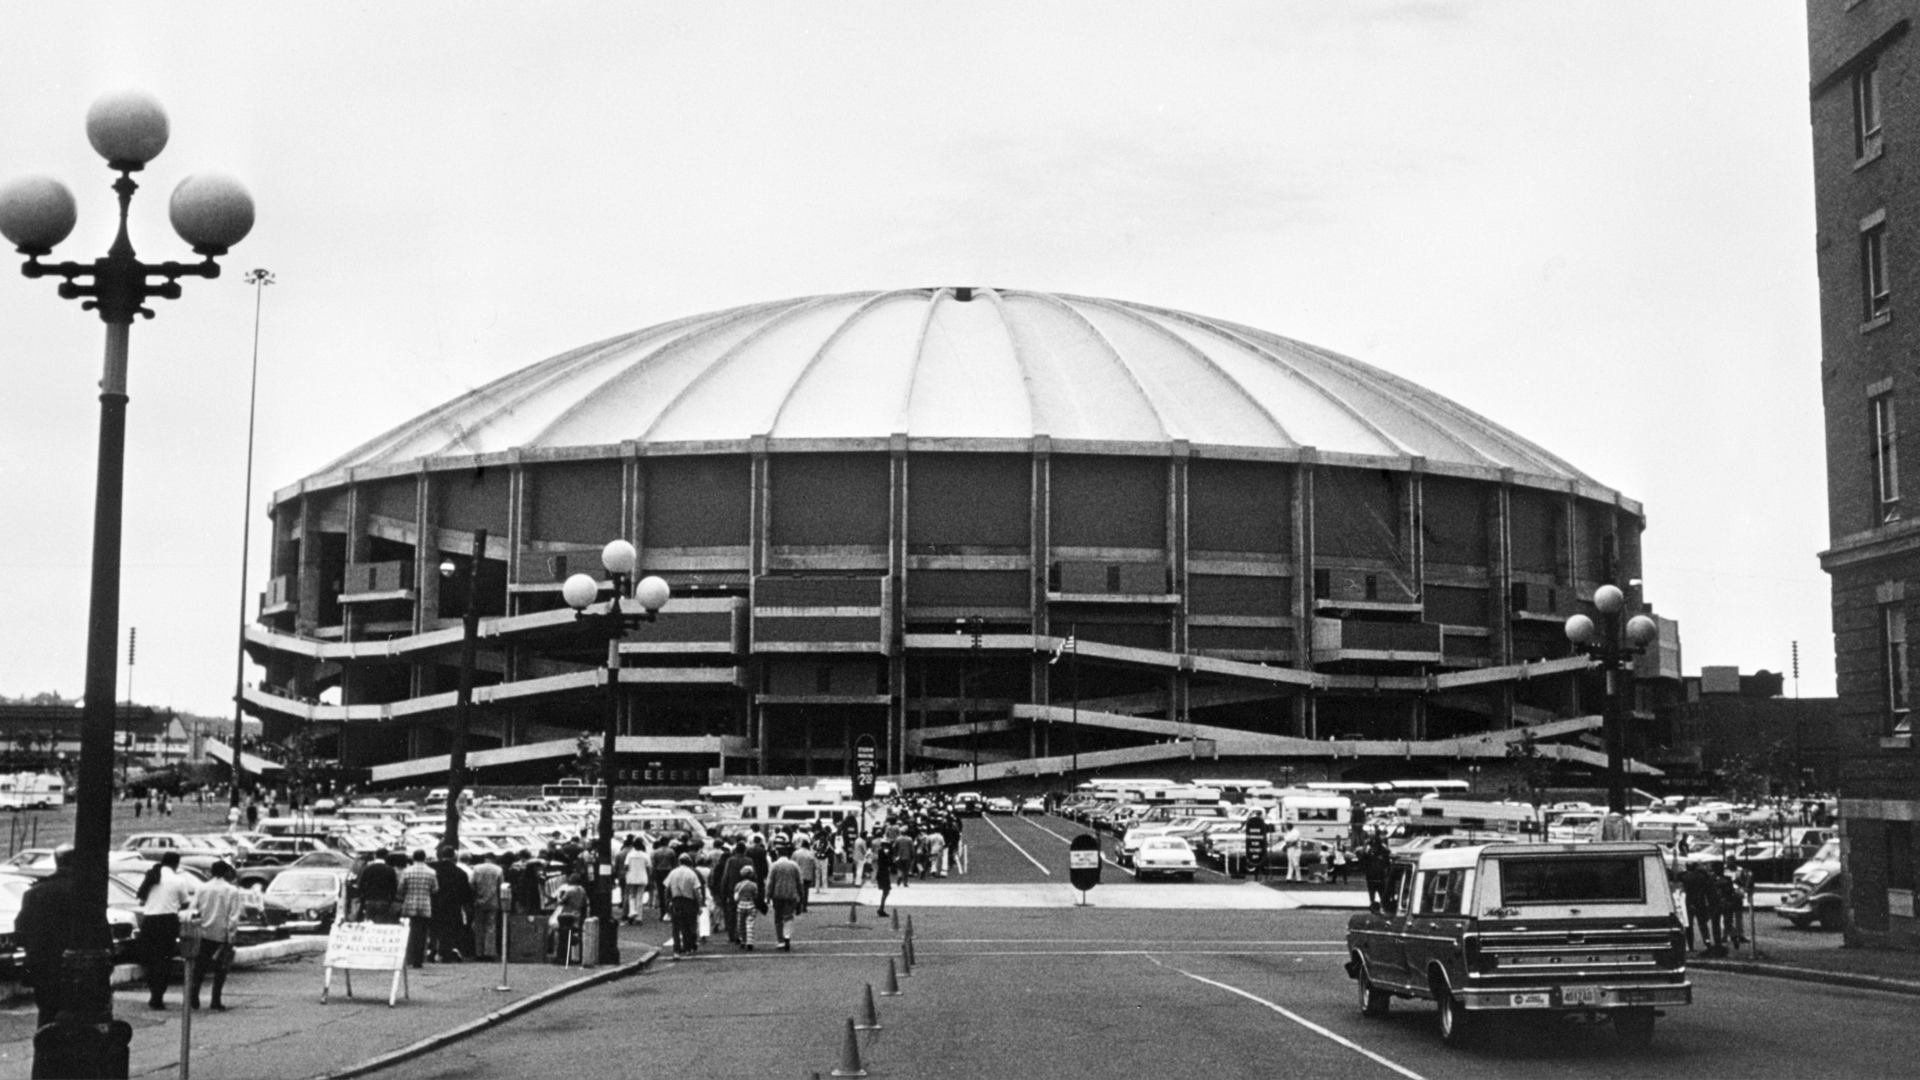 The Kingdome is shown in a black and white photo from when it was newly built, with people flocking toward the entrances.